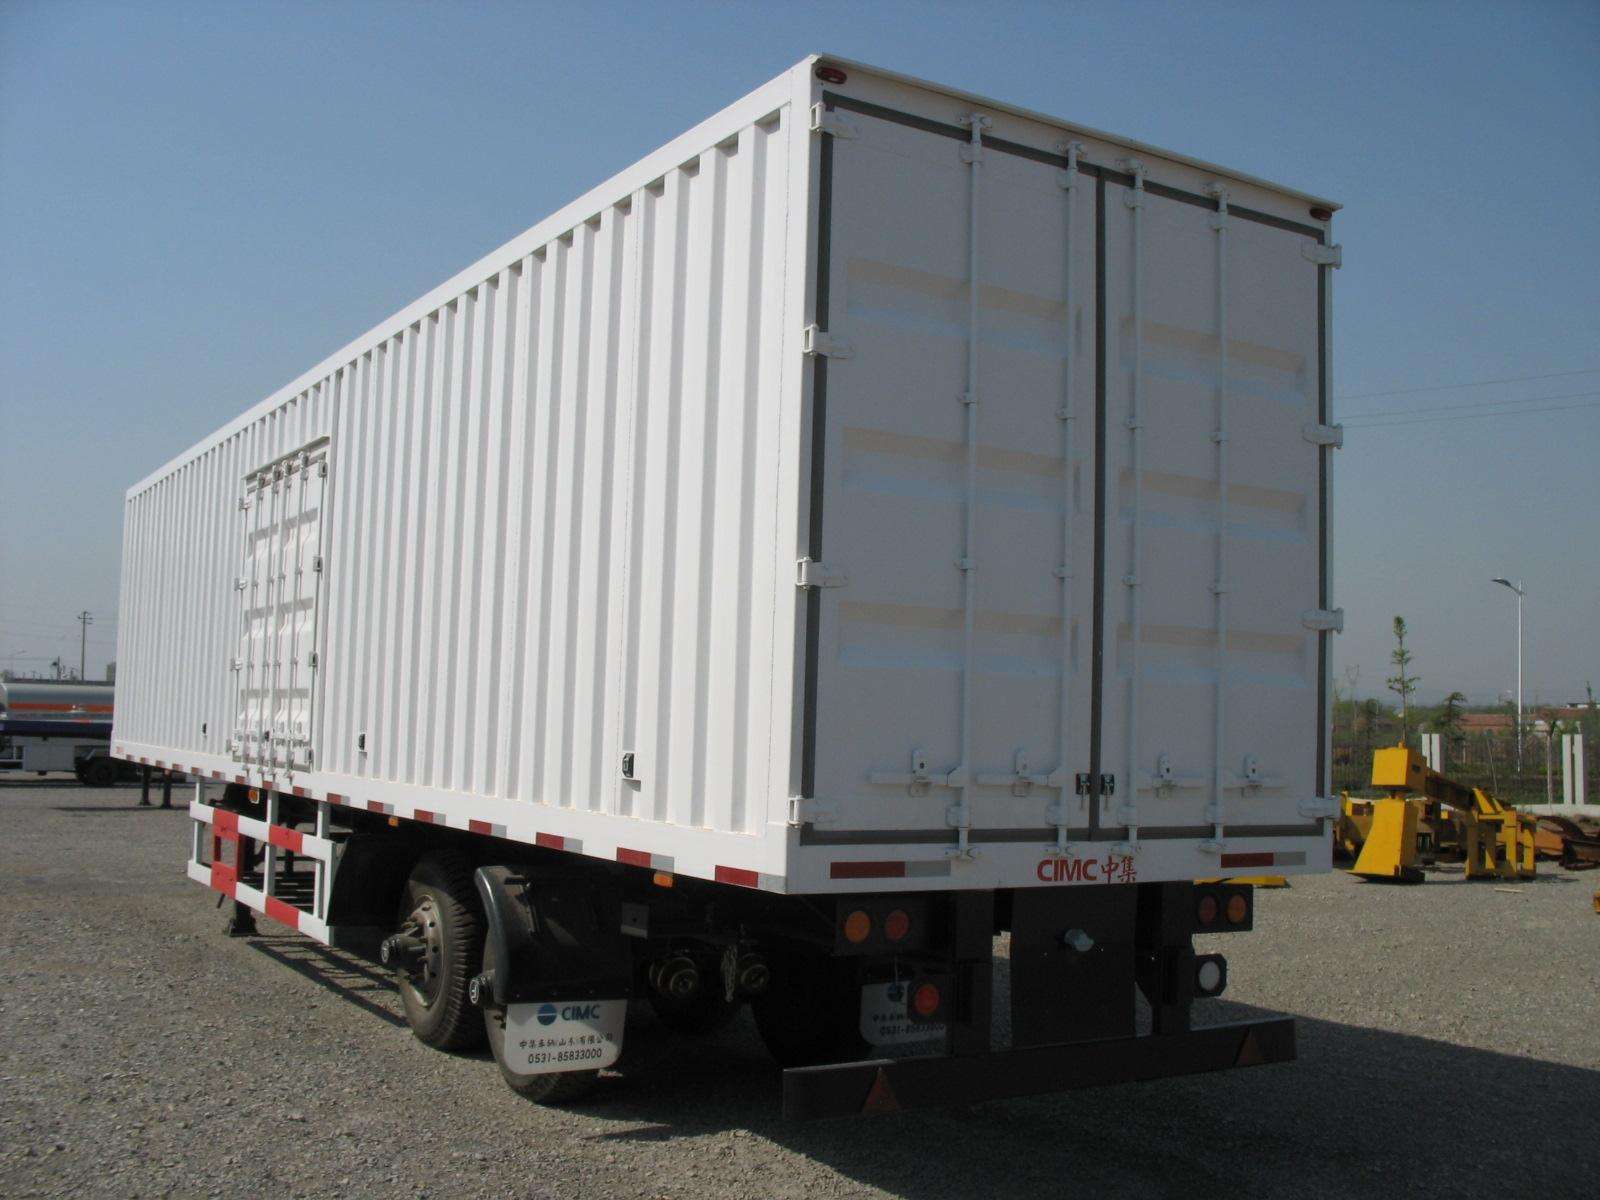 China made 3 axles 20ft 40ft container semi-trailer for freight transporting